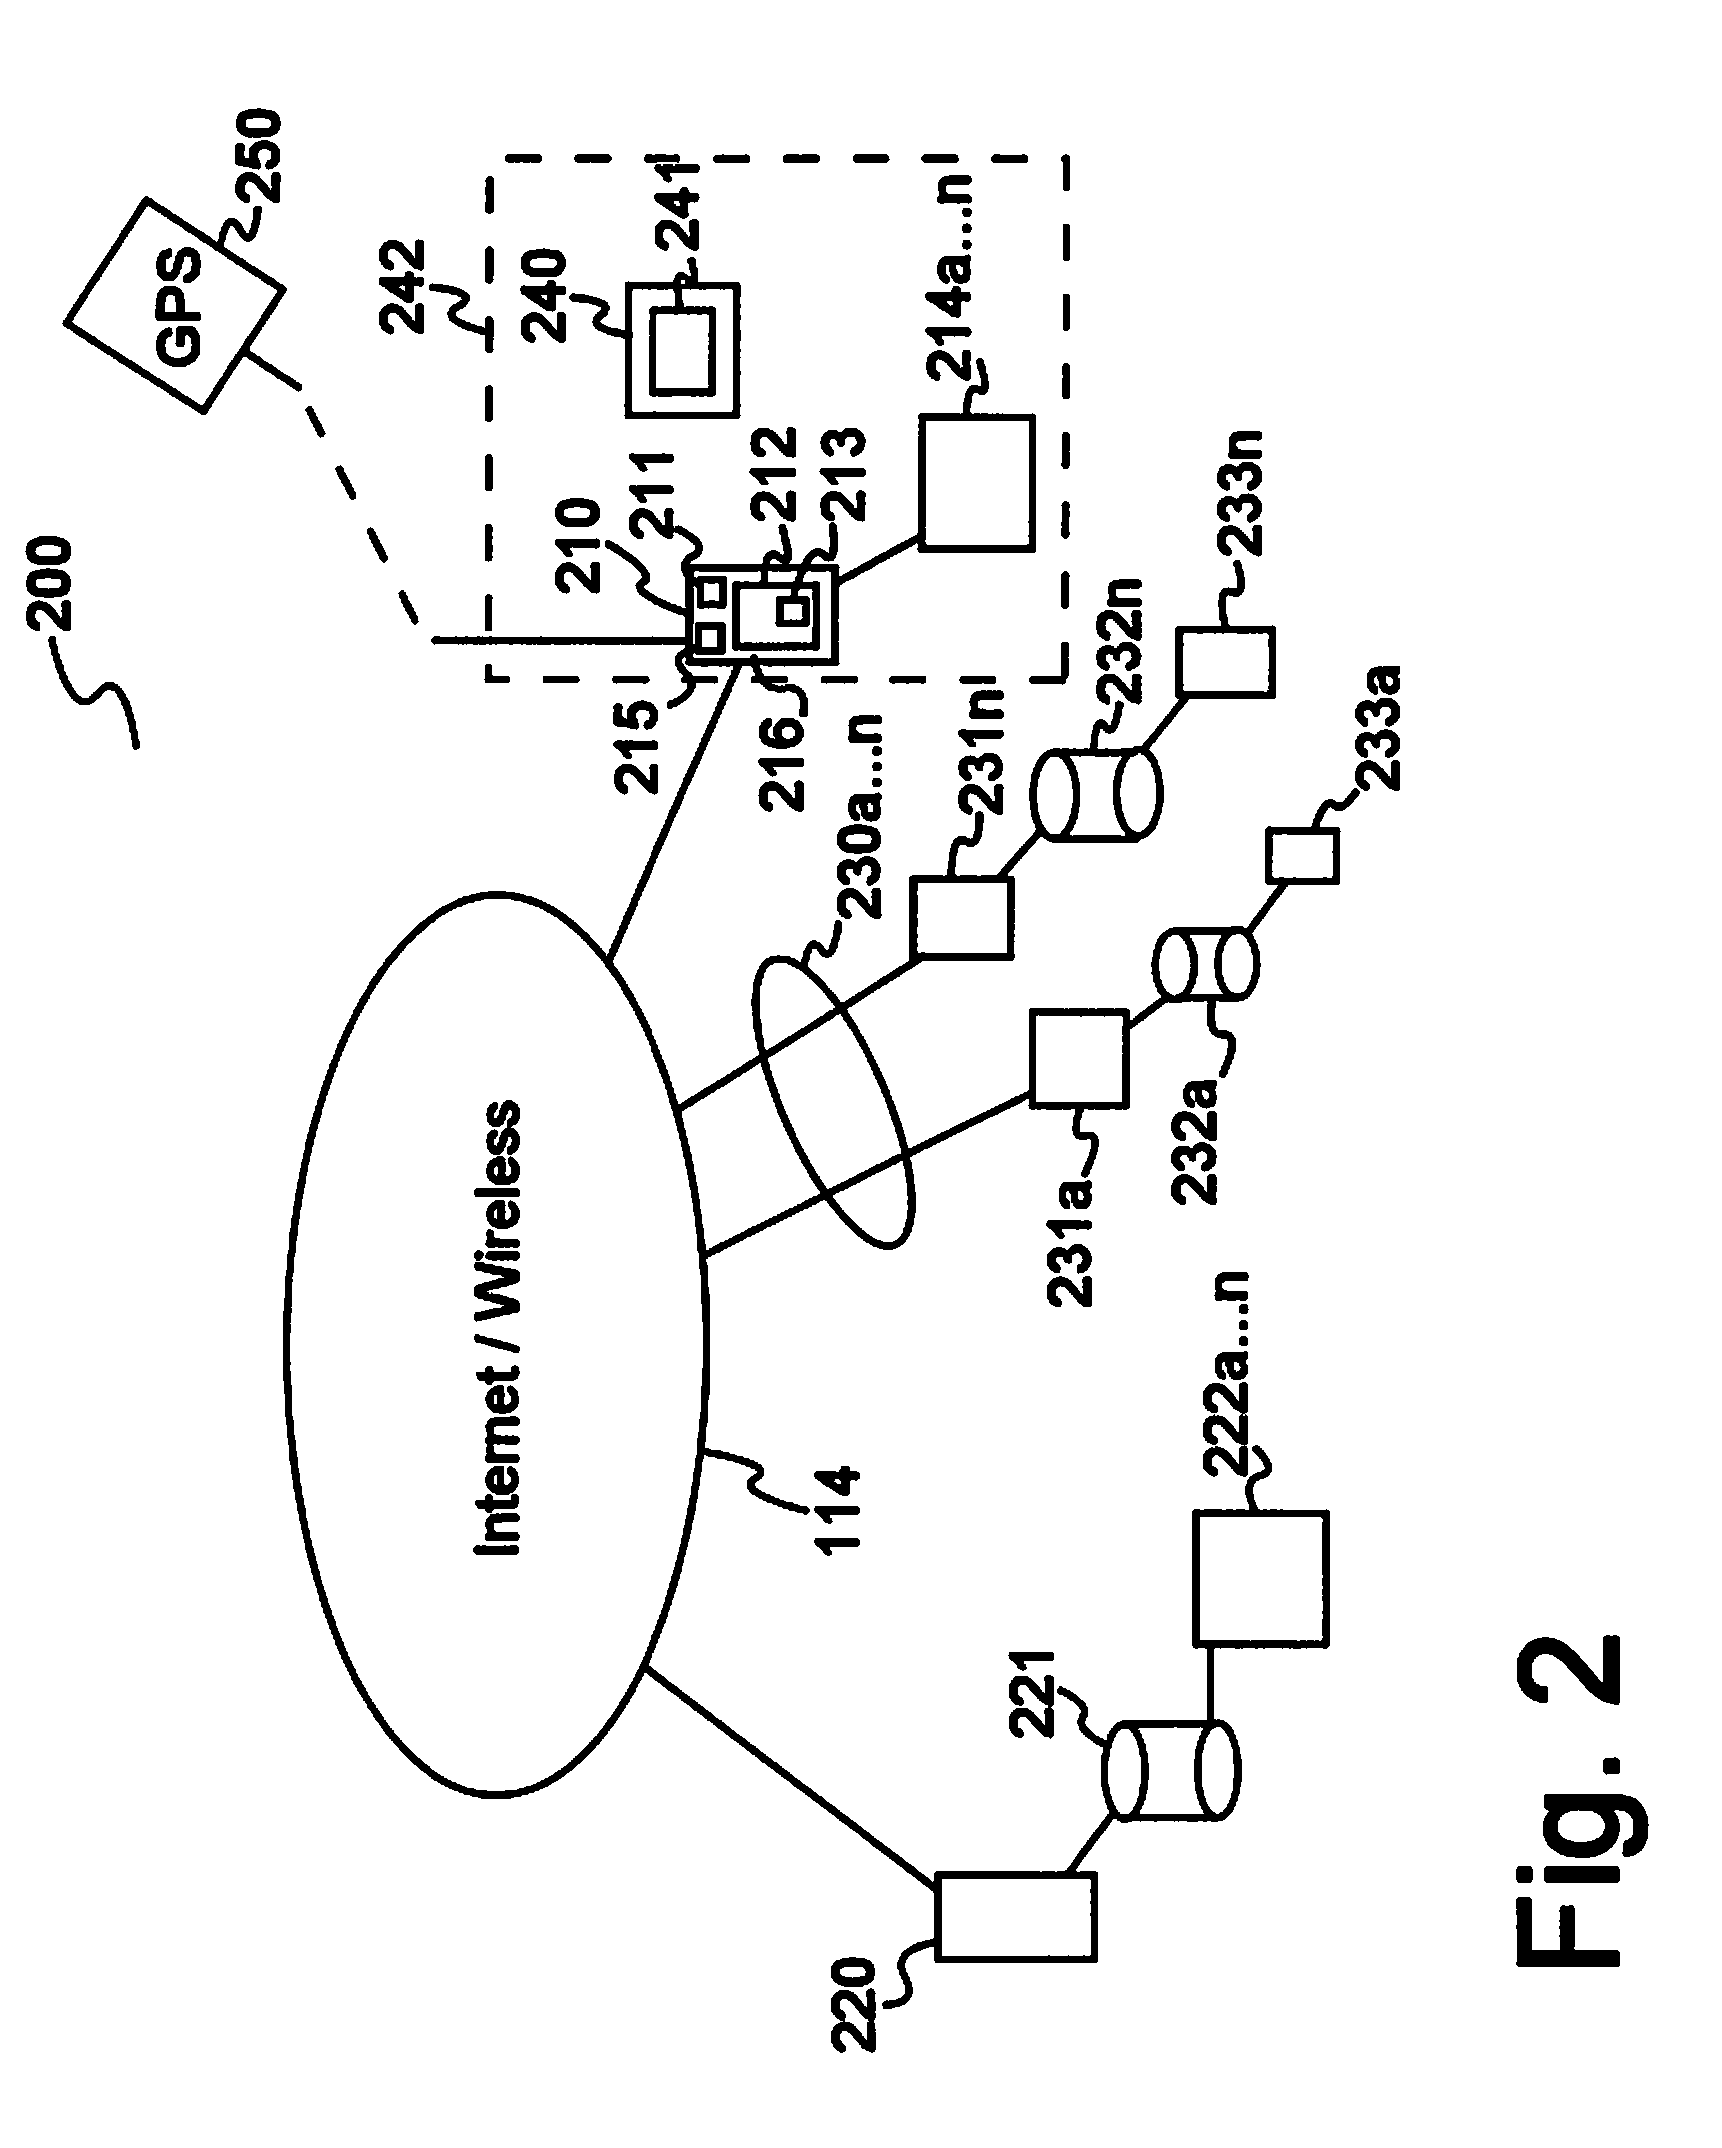 Enhanced system and method for multipath contactless transactions